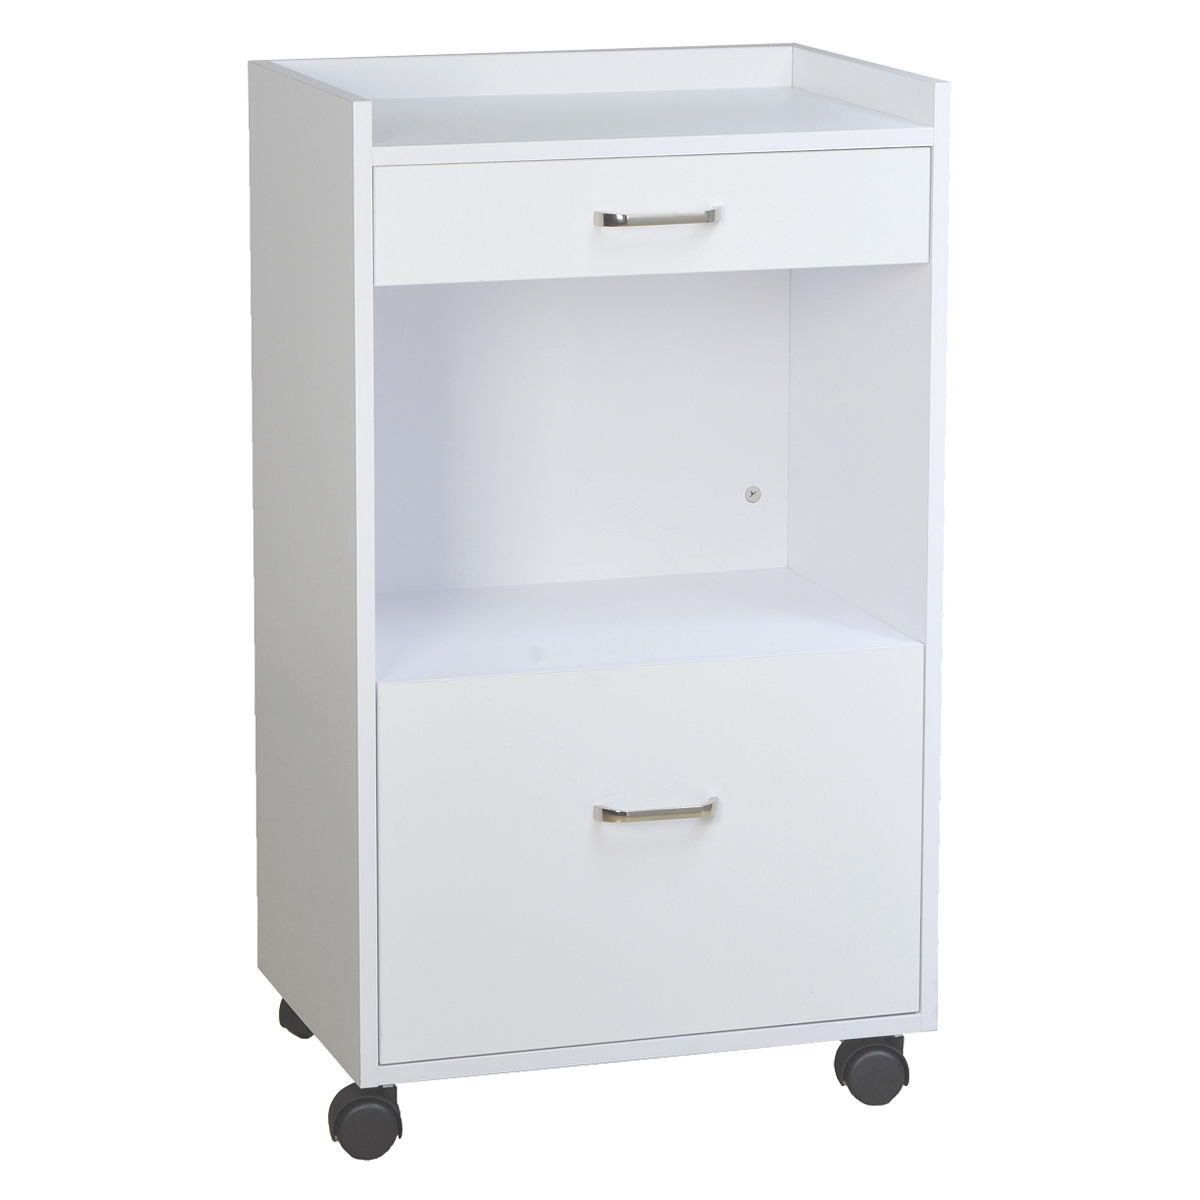 Whale Spa Matte White Trolley 2831, Acetone Resistant Rolling Cart with Drawers, Storage | Salon and Spa Equipment